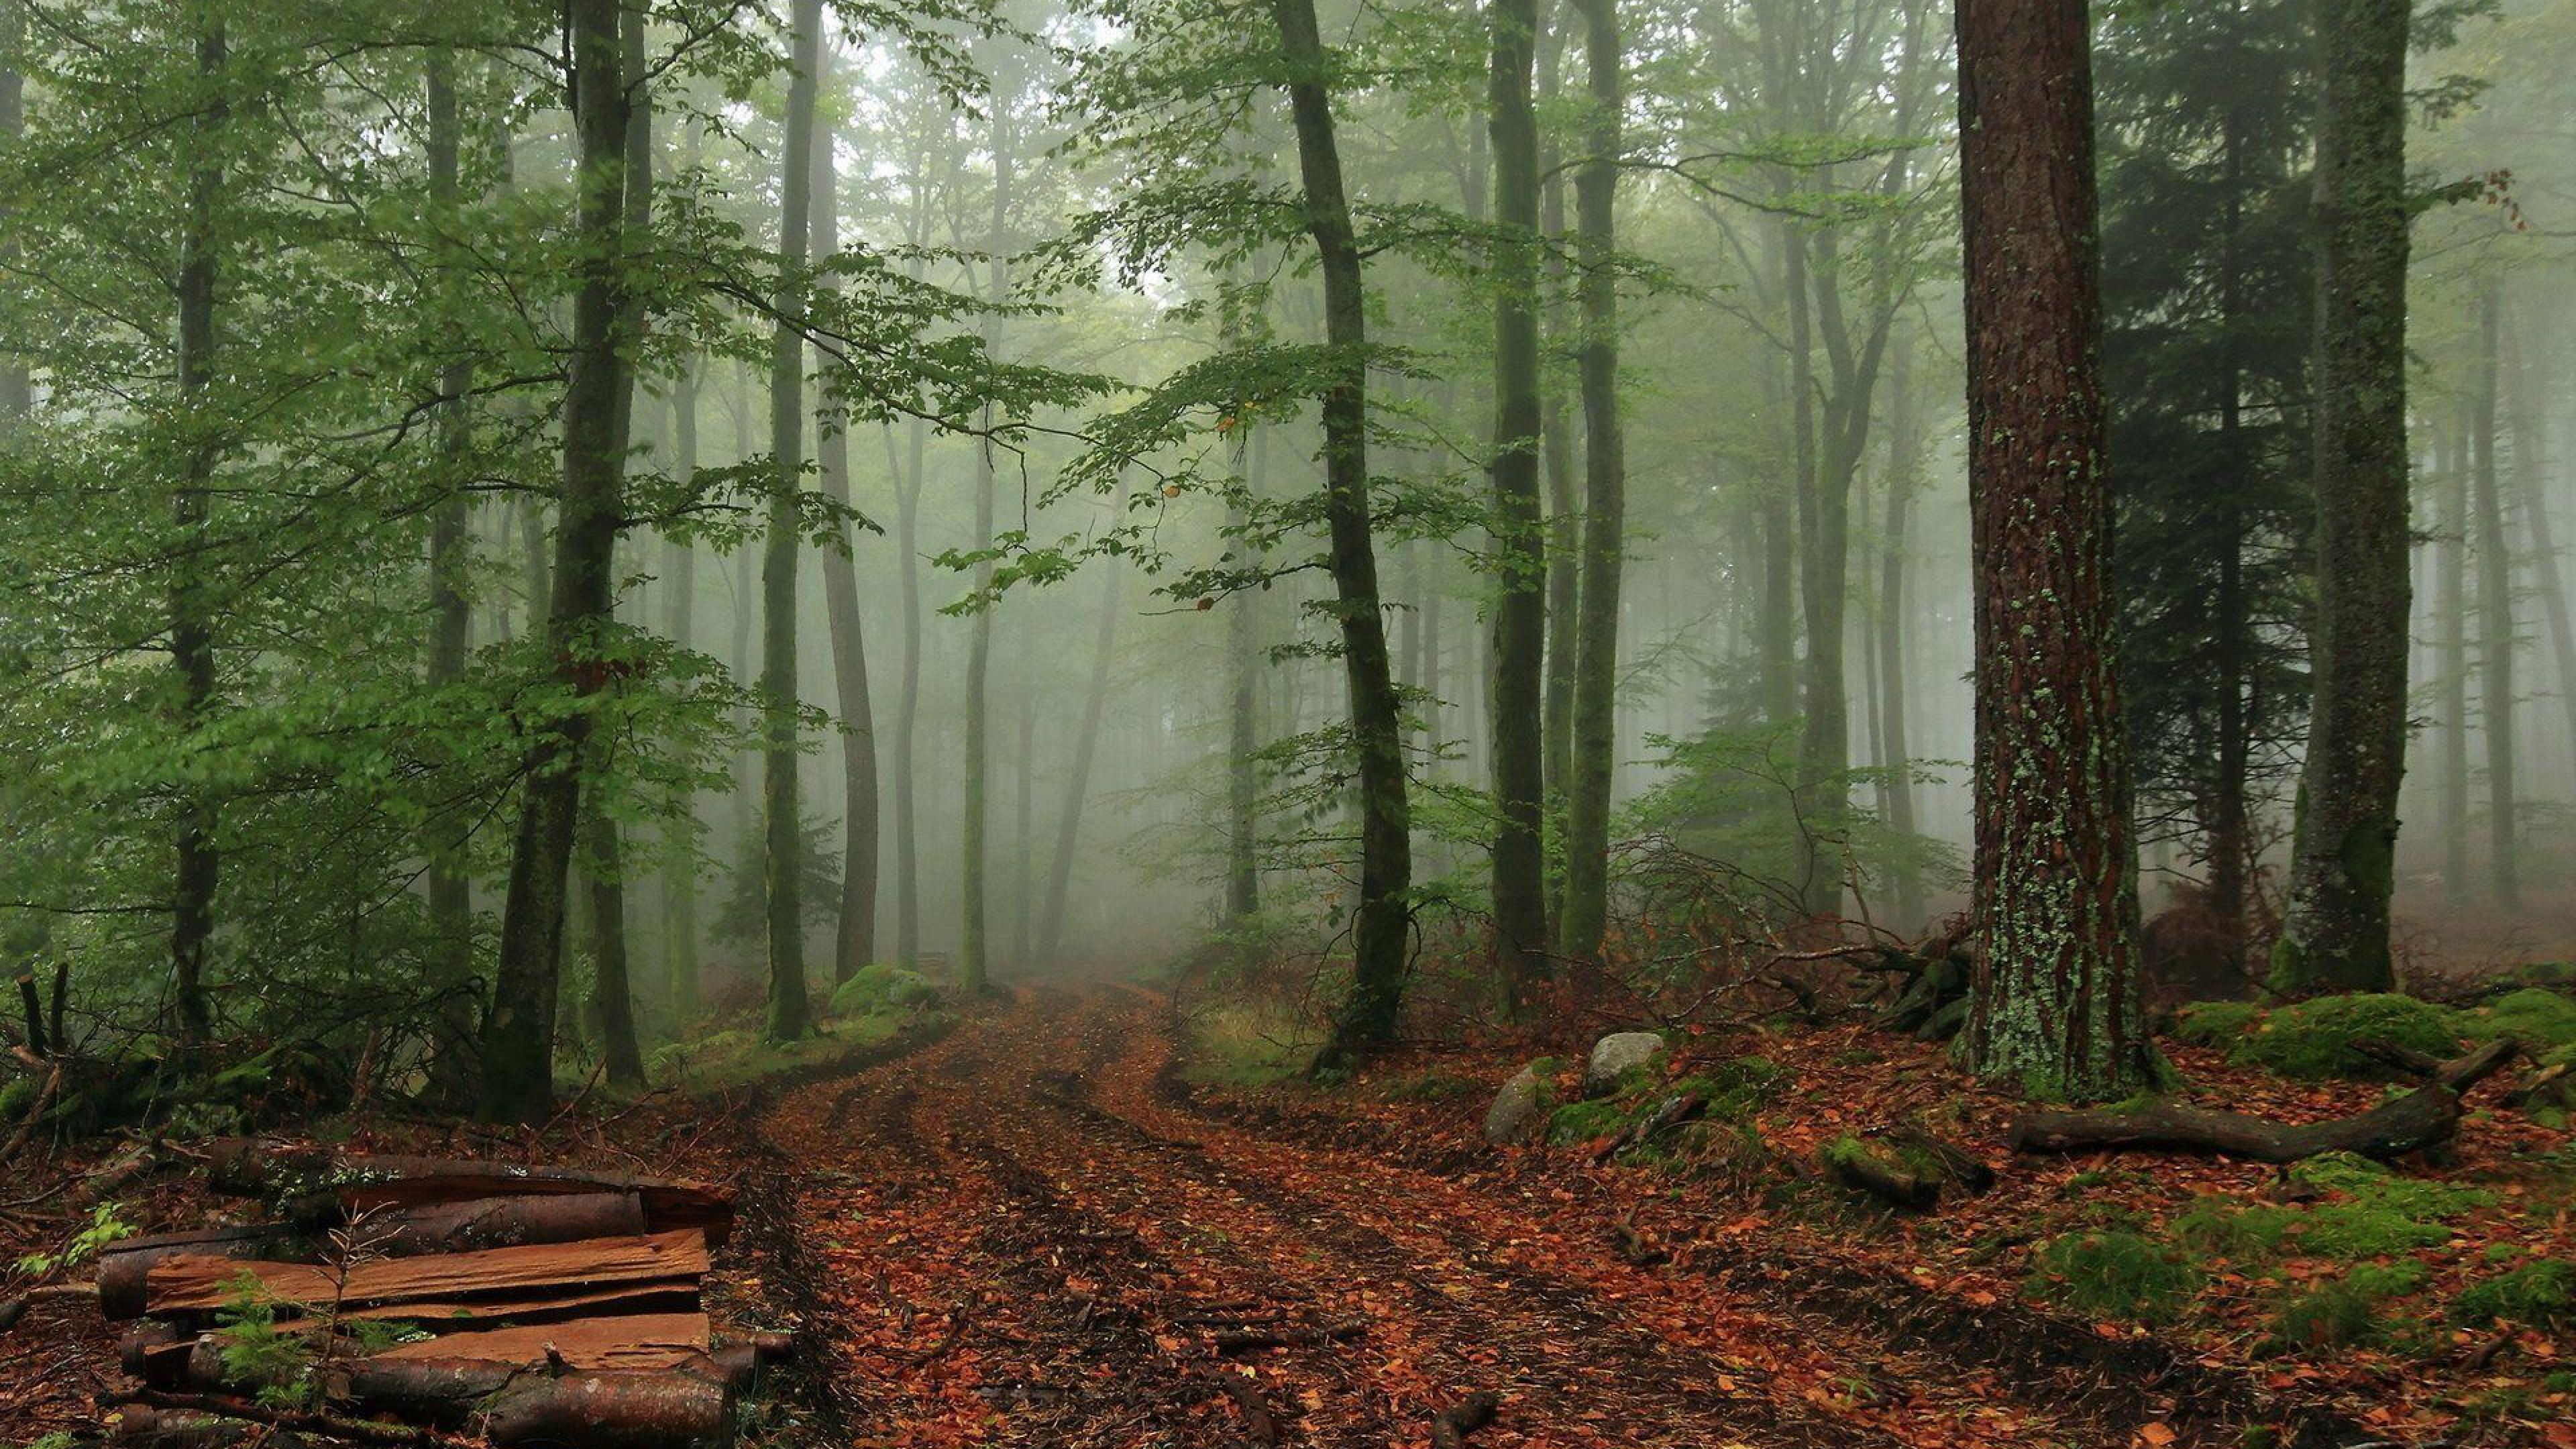 Wallpaper Wiki Nature Image Foggy Forest Pic Wpb004352